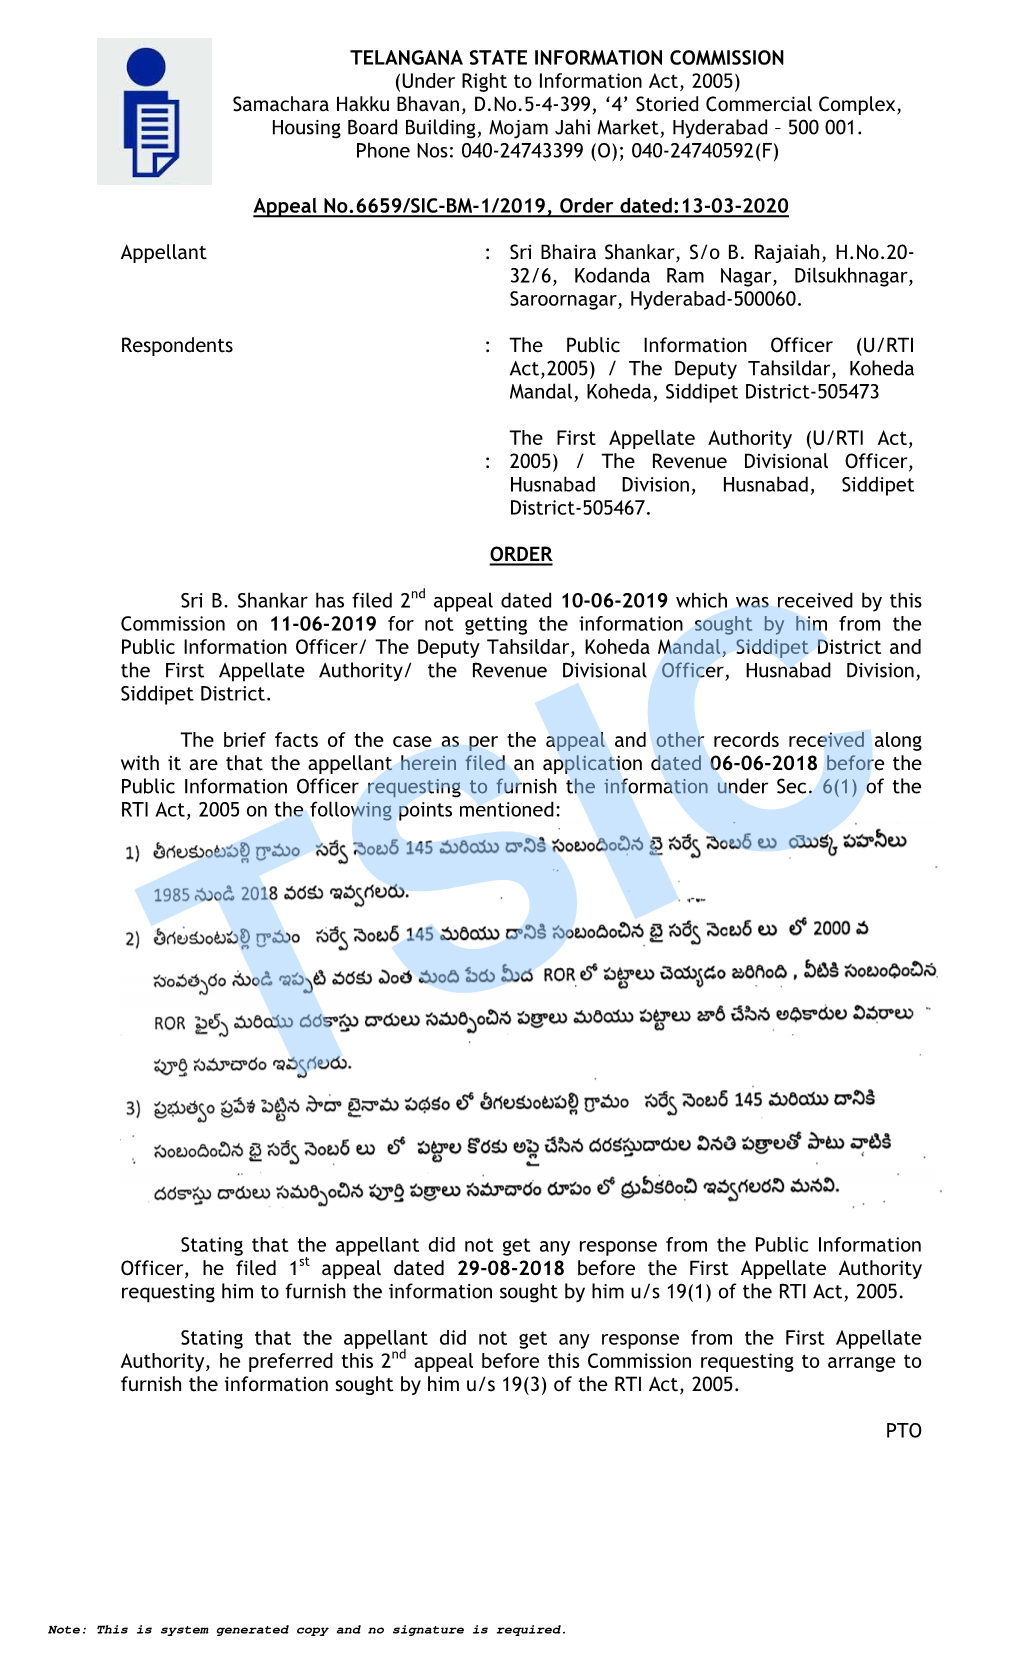 TELANGANA STATE INFORMATION COMMISSION (Under Right To